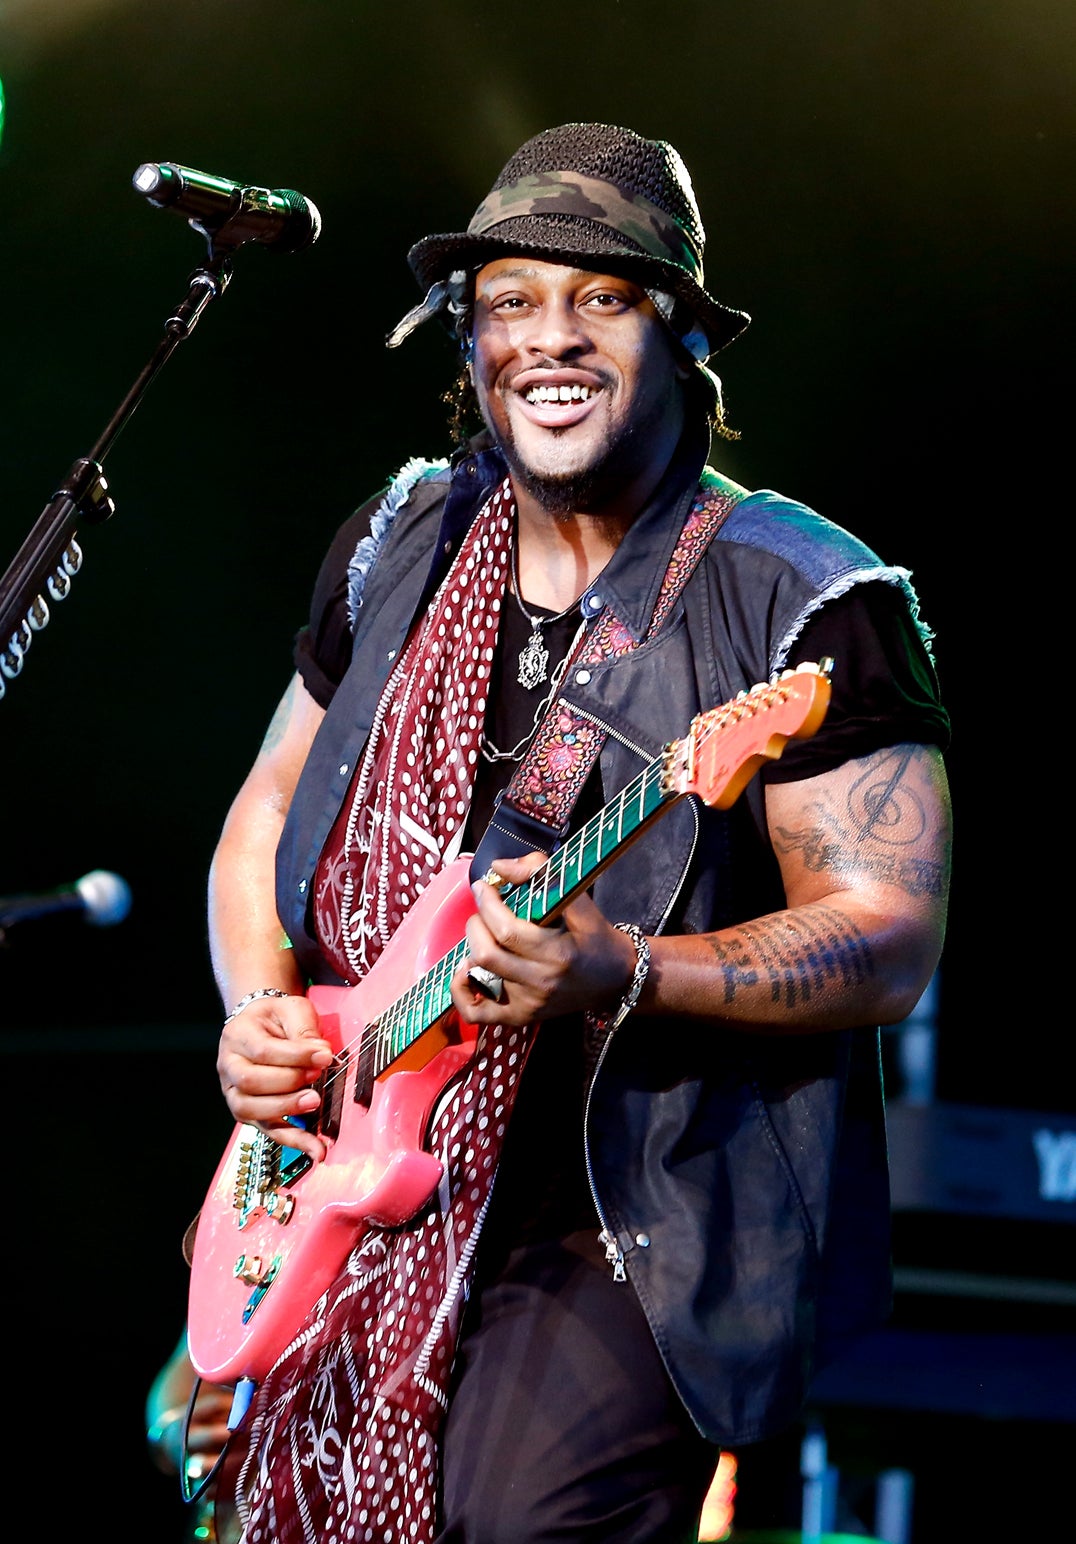 9 Things We Learned About D’Angelo from His Red Bull Music Academy Lecture